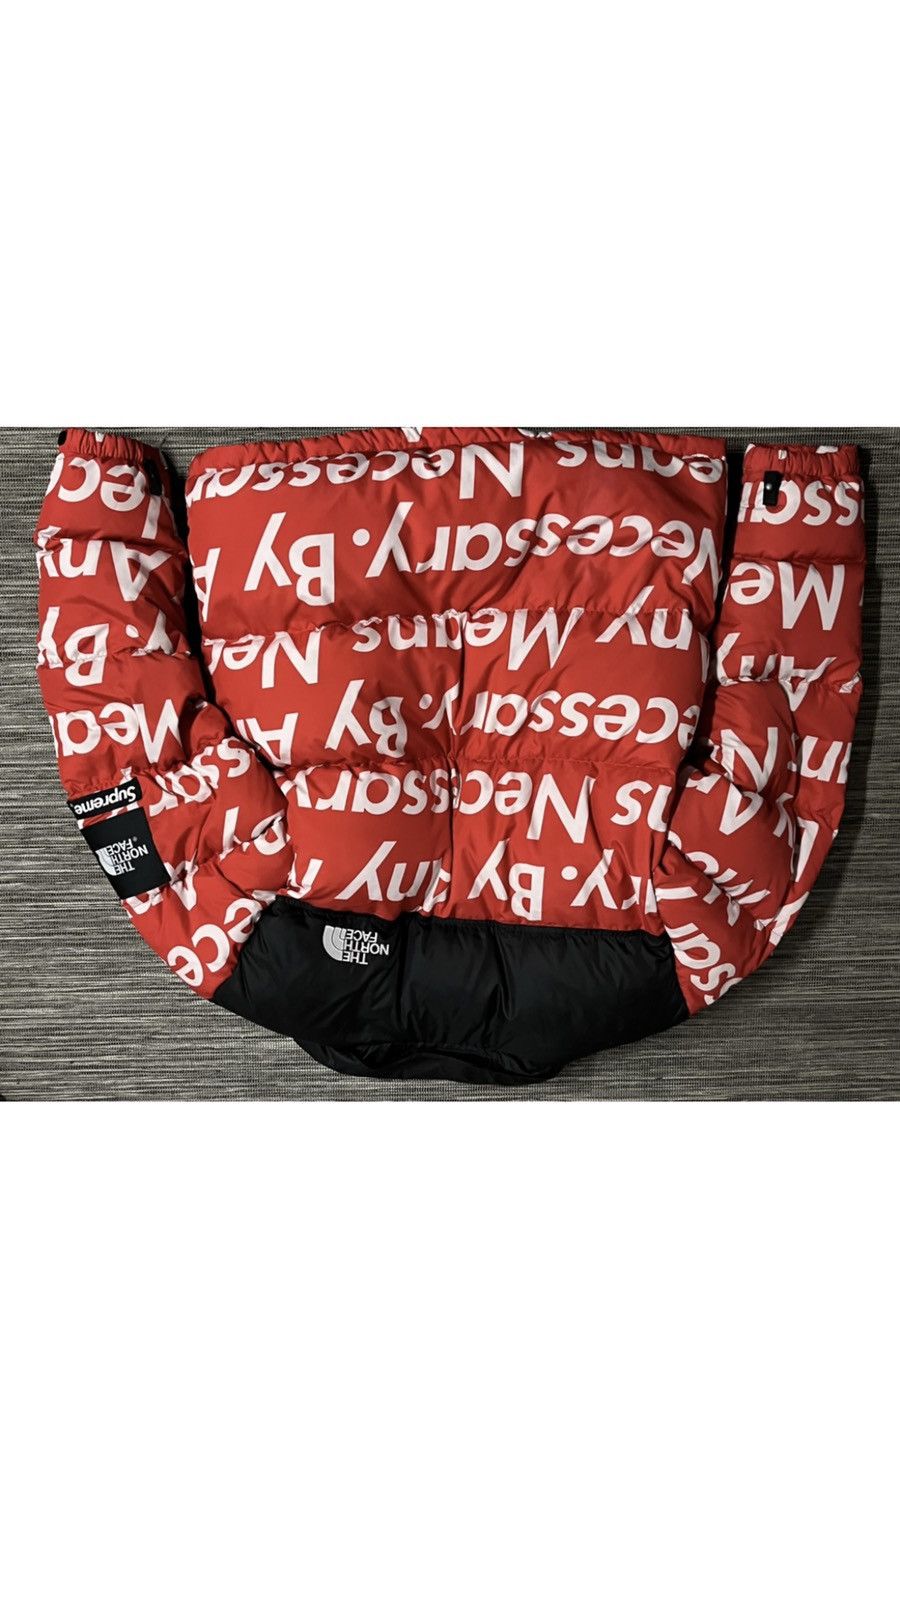 Supreme Supreme X Northface “By Any Means Necessary” print jacket Size US L / EU 52-54 / 3 - 3 Thumbnail